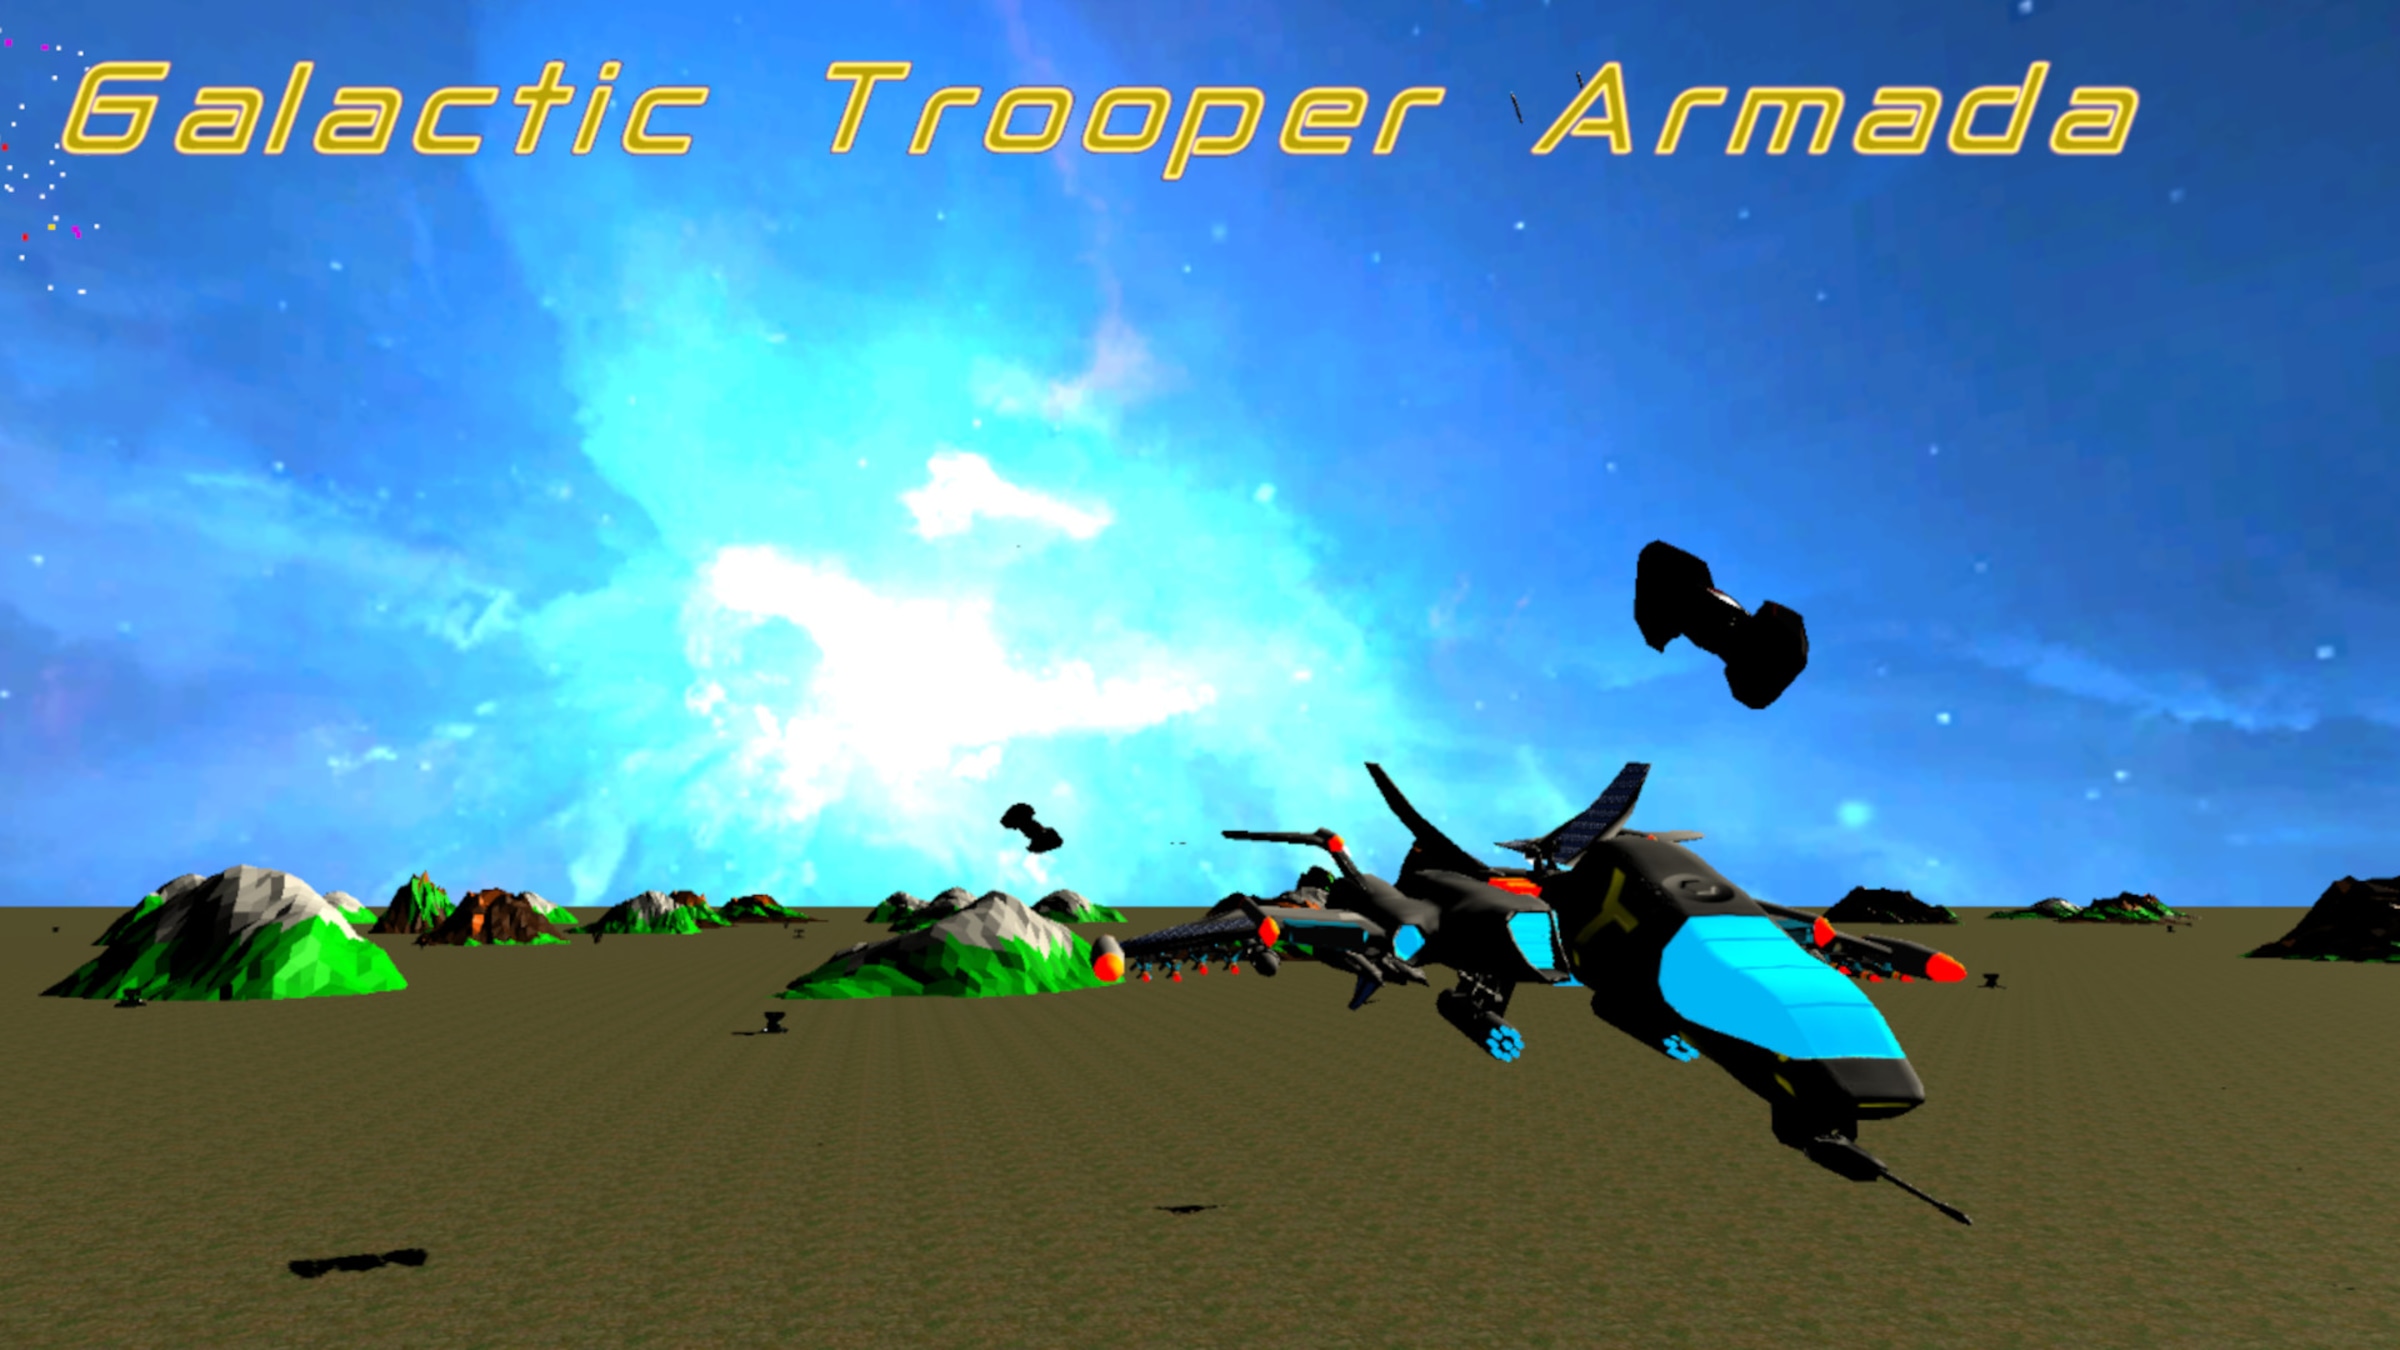 Galactic Trooper Armada For Nintendo Switch - Nintendo Official Site